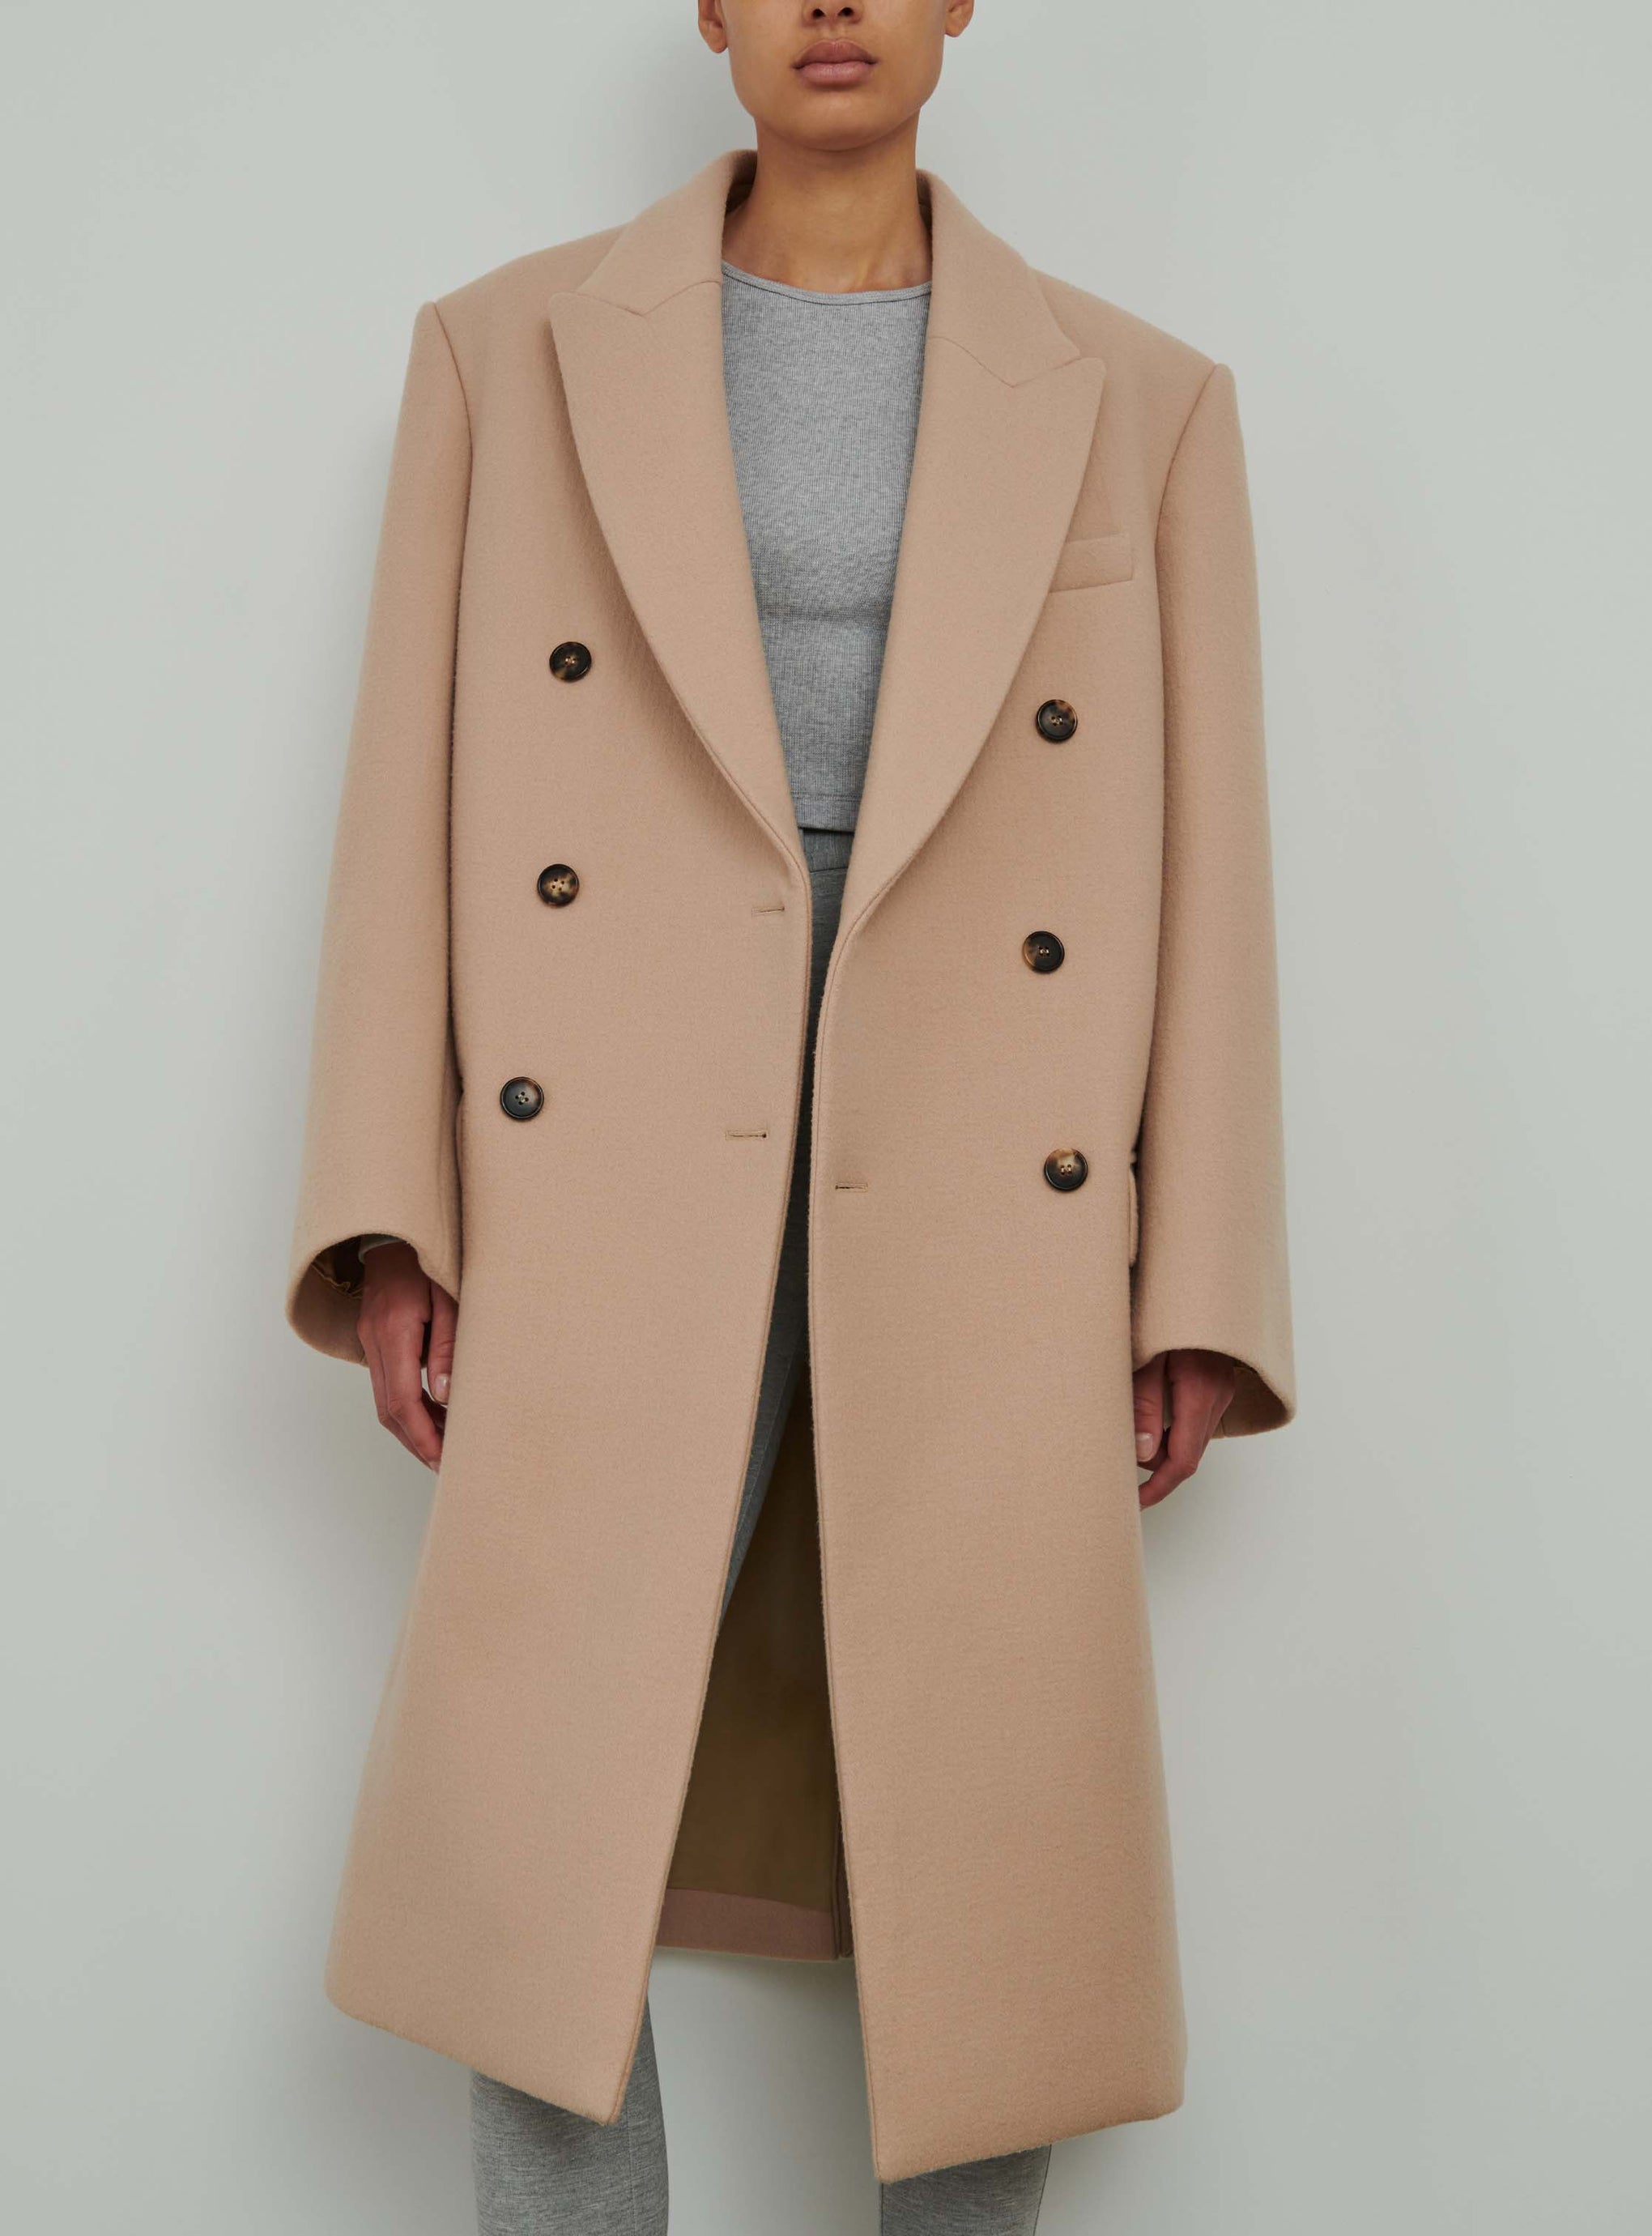 The Wardrobe NYC HB Coat in Biscuit available at The New Trend Australia